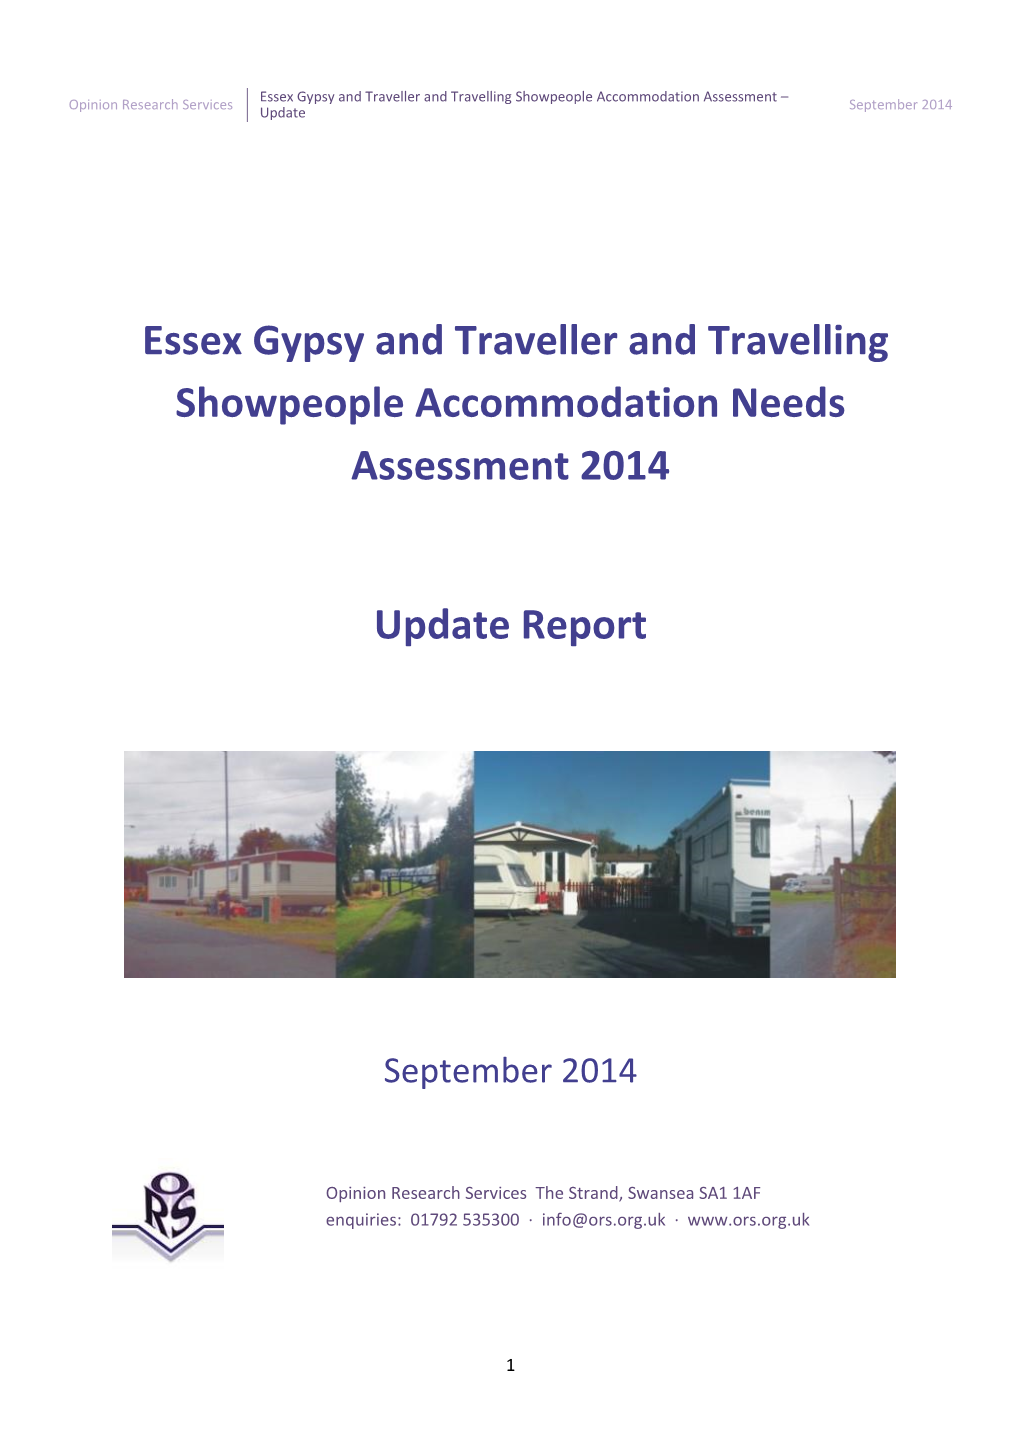 Essex Gypsy and Traveller and Travelling Showpeople Accommodation Assessment – Opinion Research Services September 2014 Update